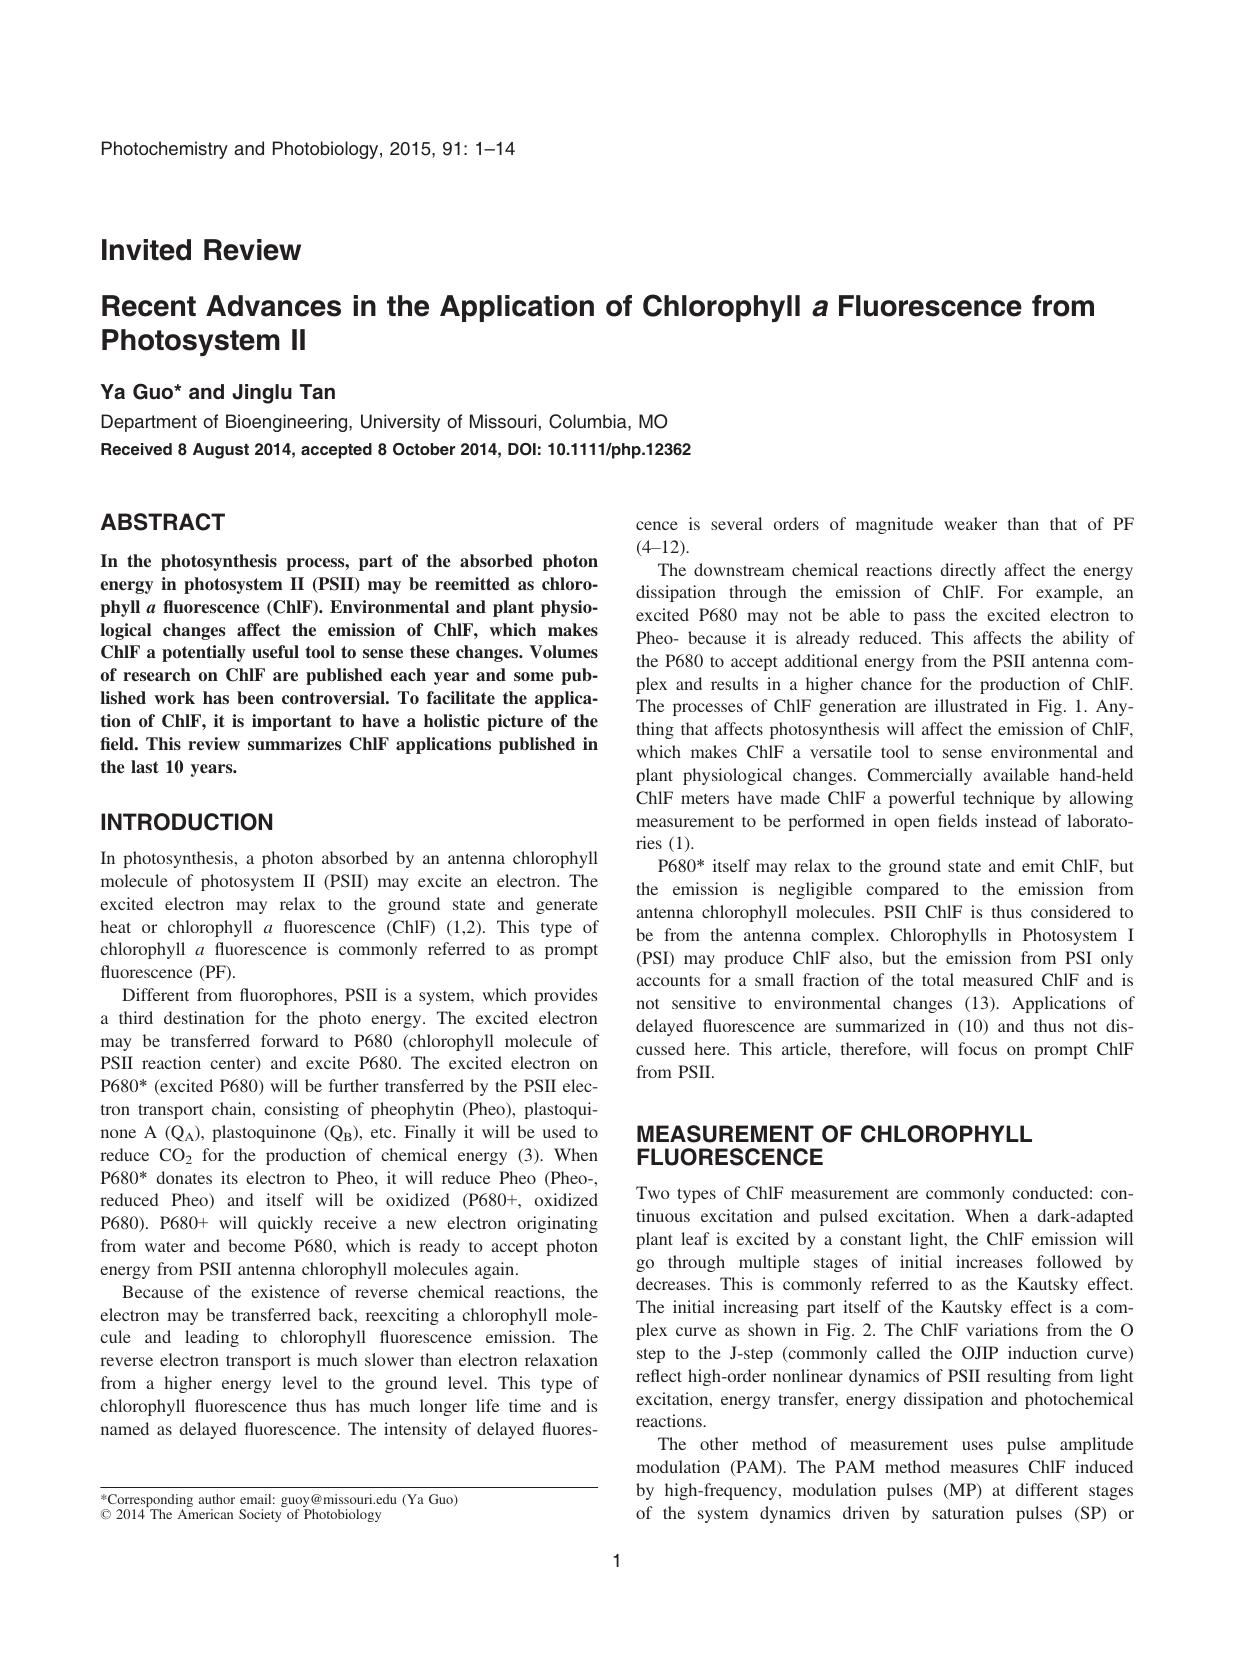 Recent Advances in the Application of Chlorophyll a Fluorescence from Photosystem II by Unknown